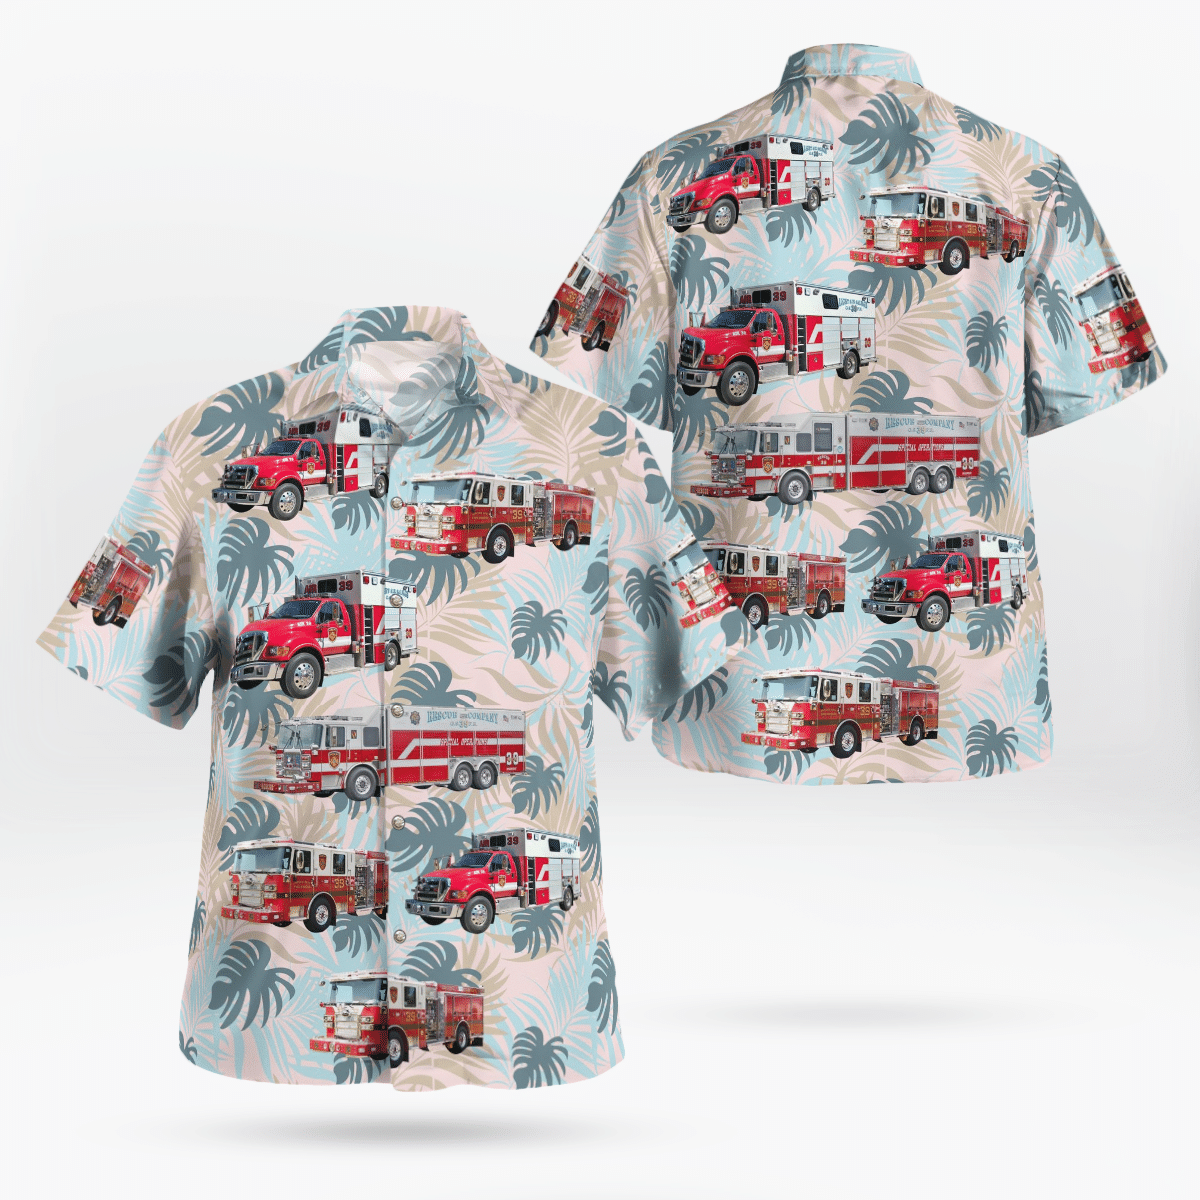 If you are in need of a new summertime look, pick up this Hawaiian shirt 83